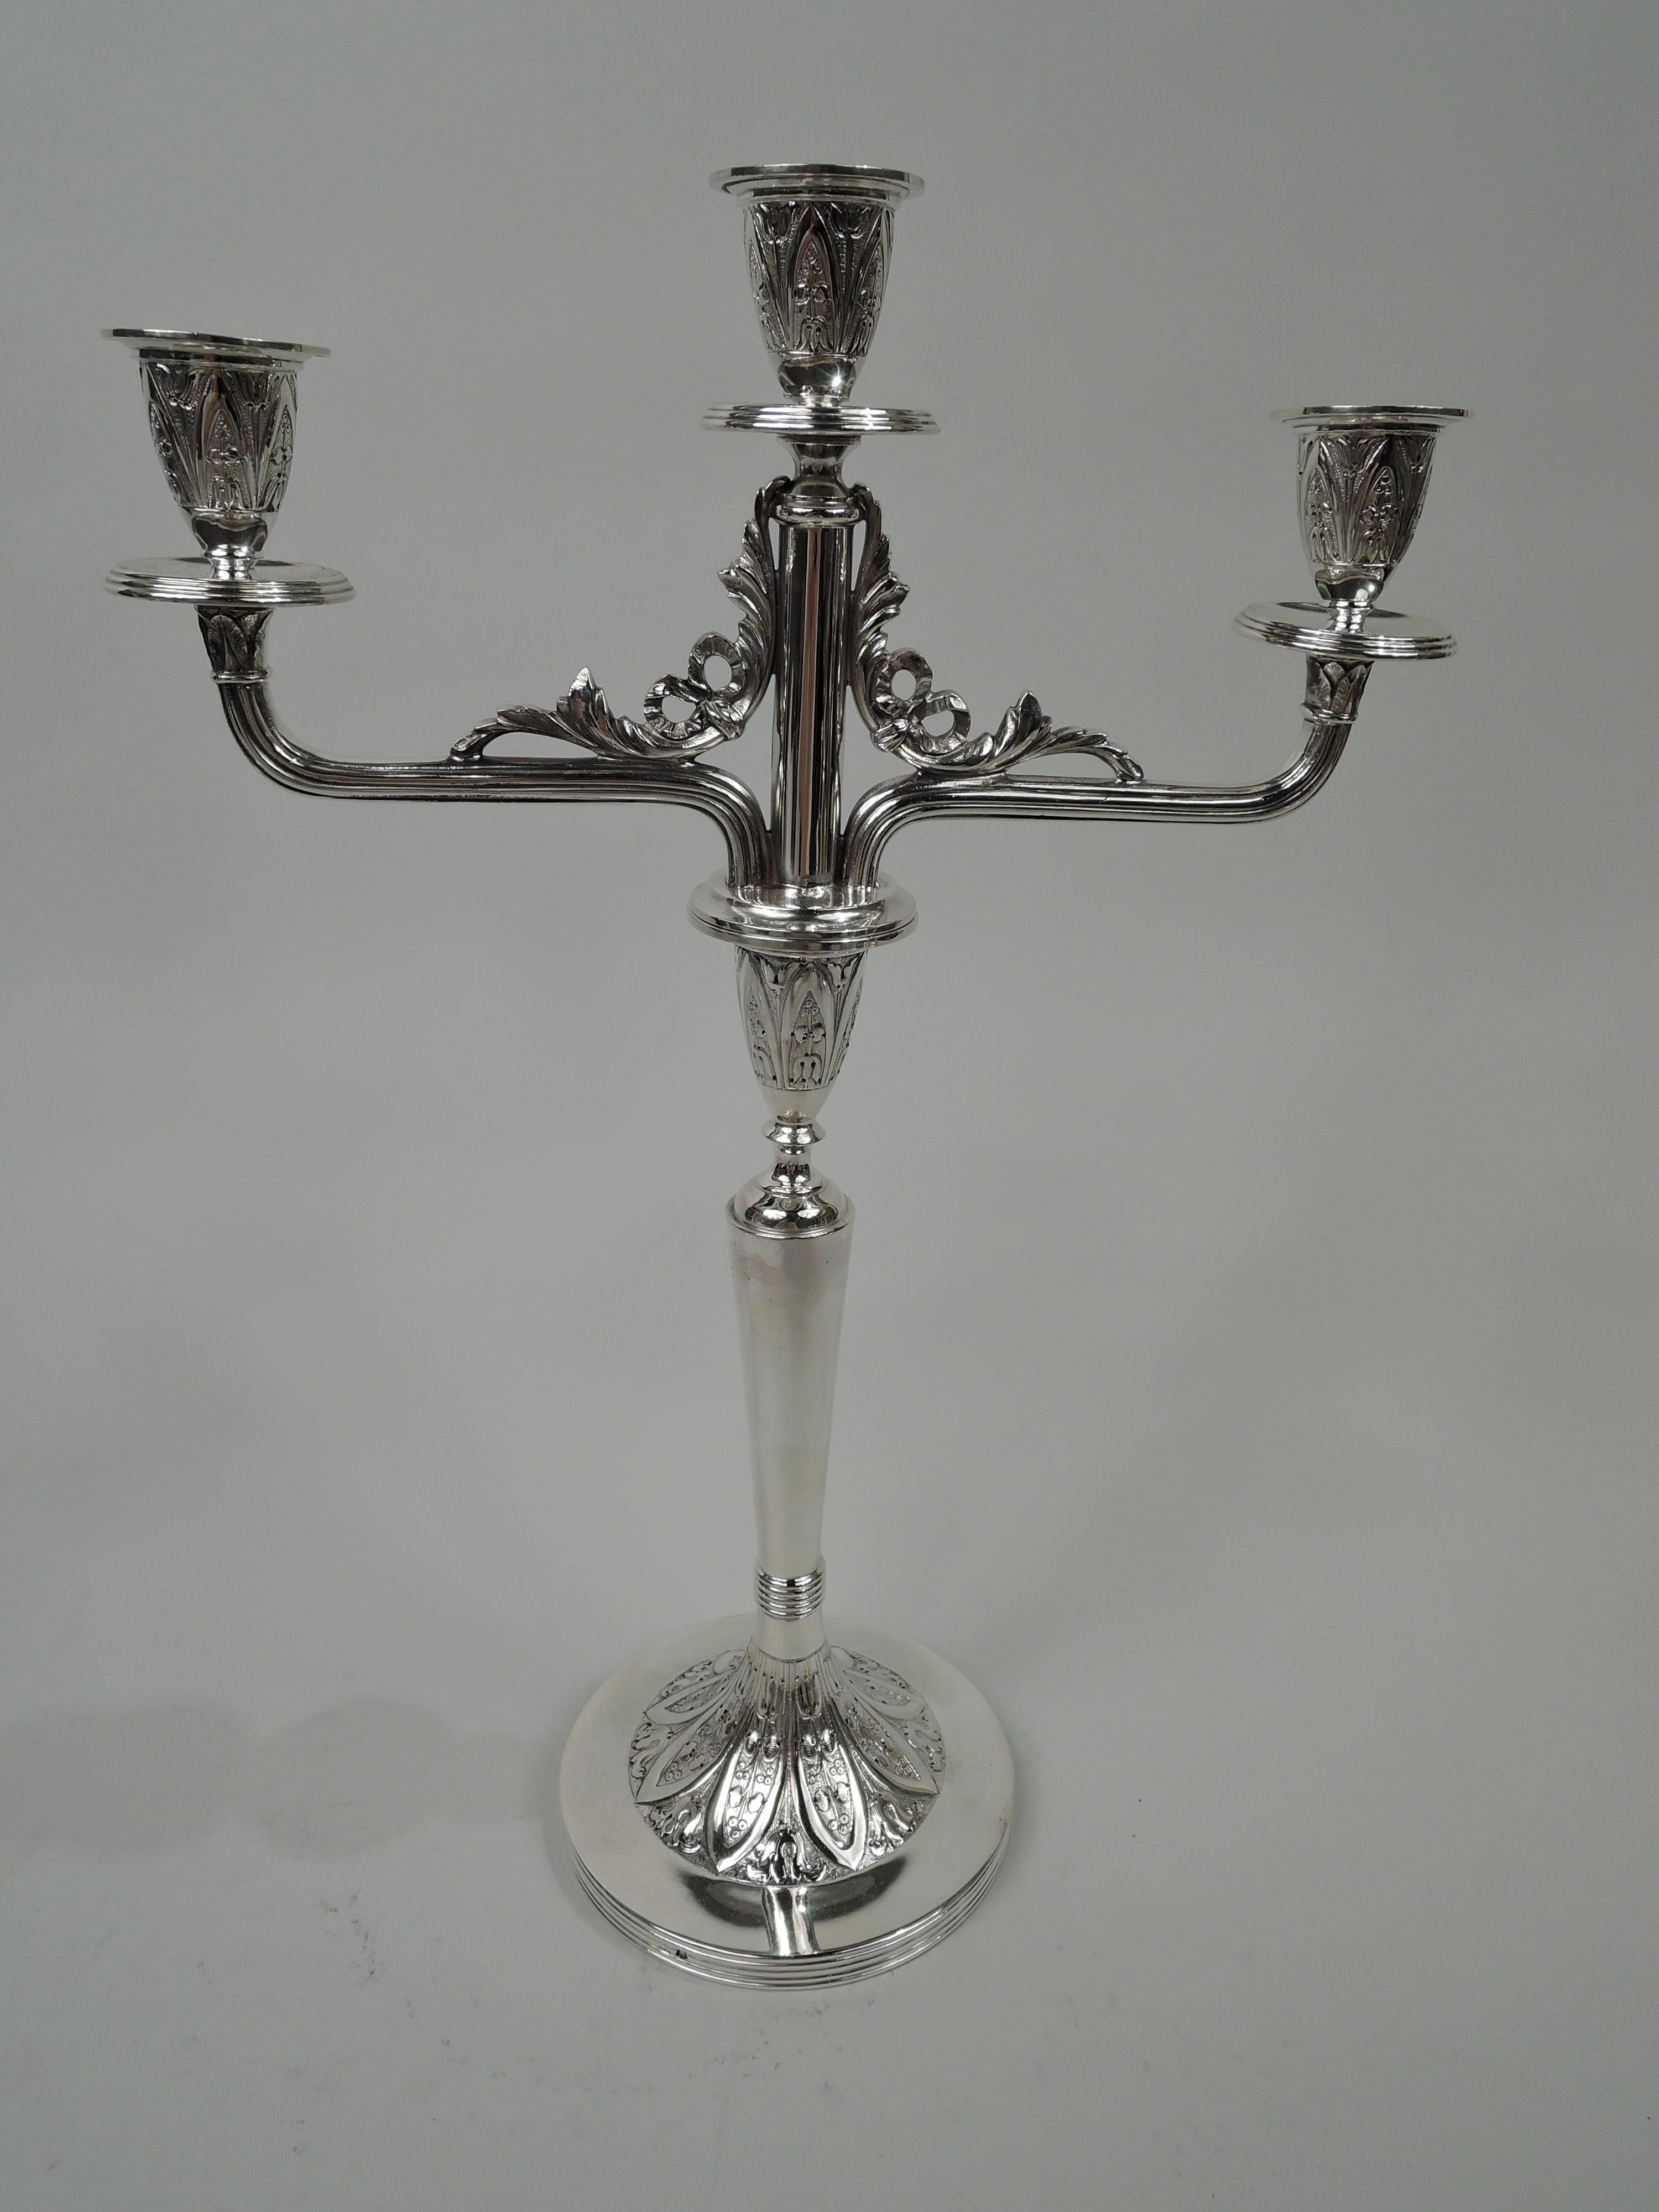 Pair of Austrian Aesthetic 800 silver 3-light candelabra, circa 1880. Each: Raised central light between bracket branches, each terminating in single socket. Sockets conical with stylized ornament comprising flowers set in leaf-and-dart borders on